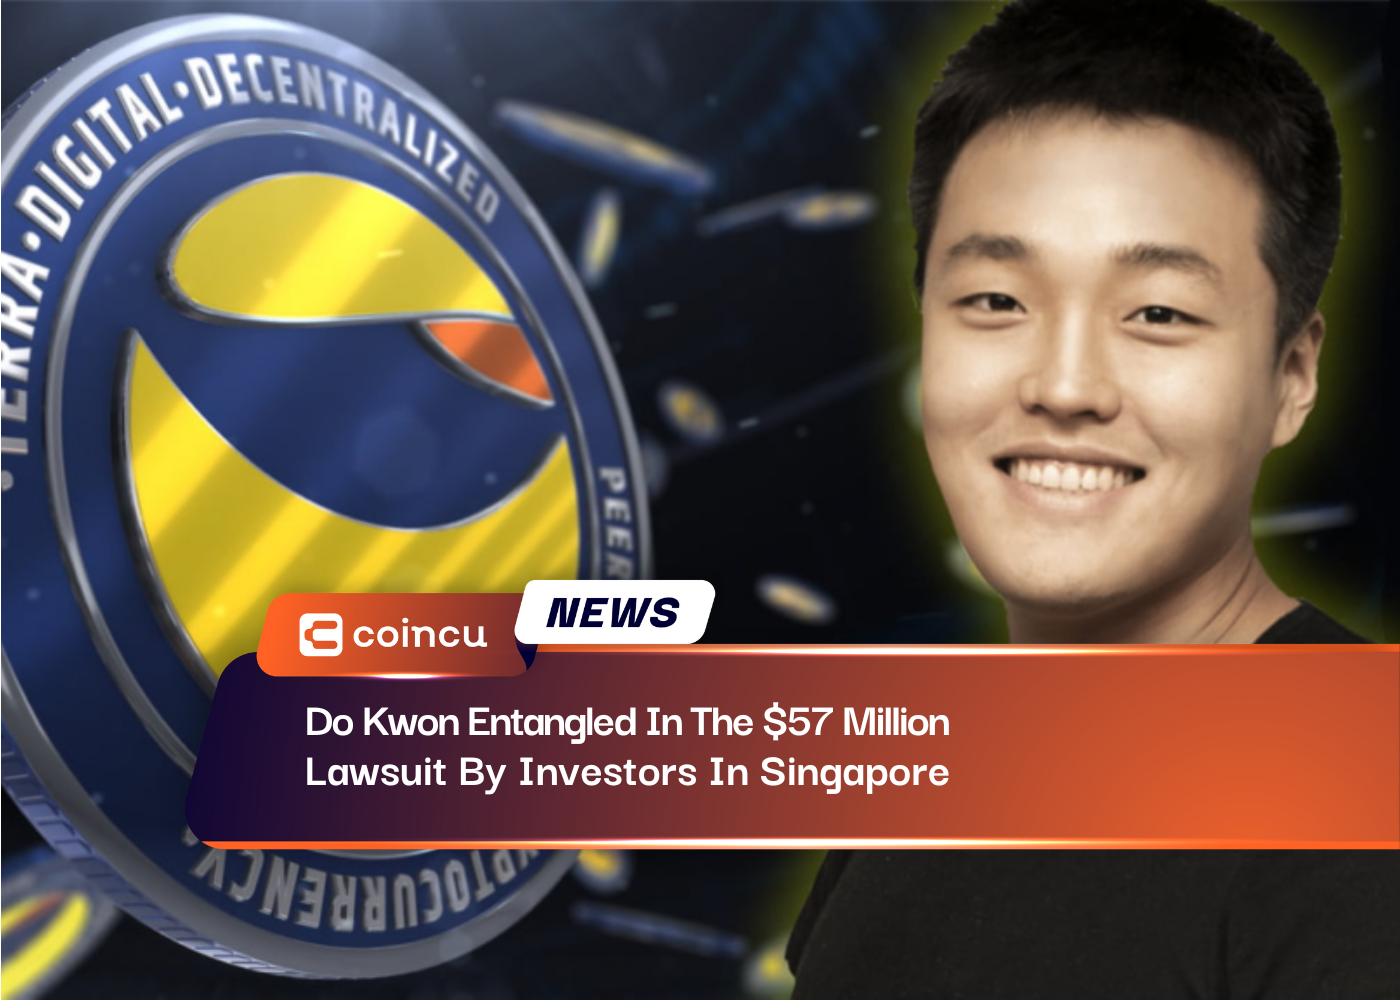 Do Kwon Entangled In The $57 Million Lawsuit By Investors In Singapore